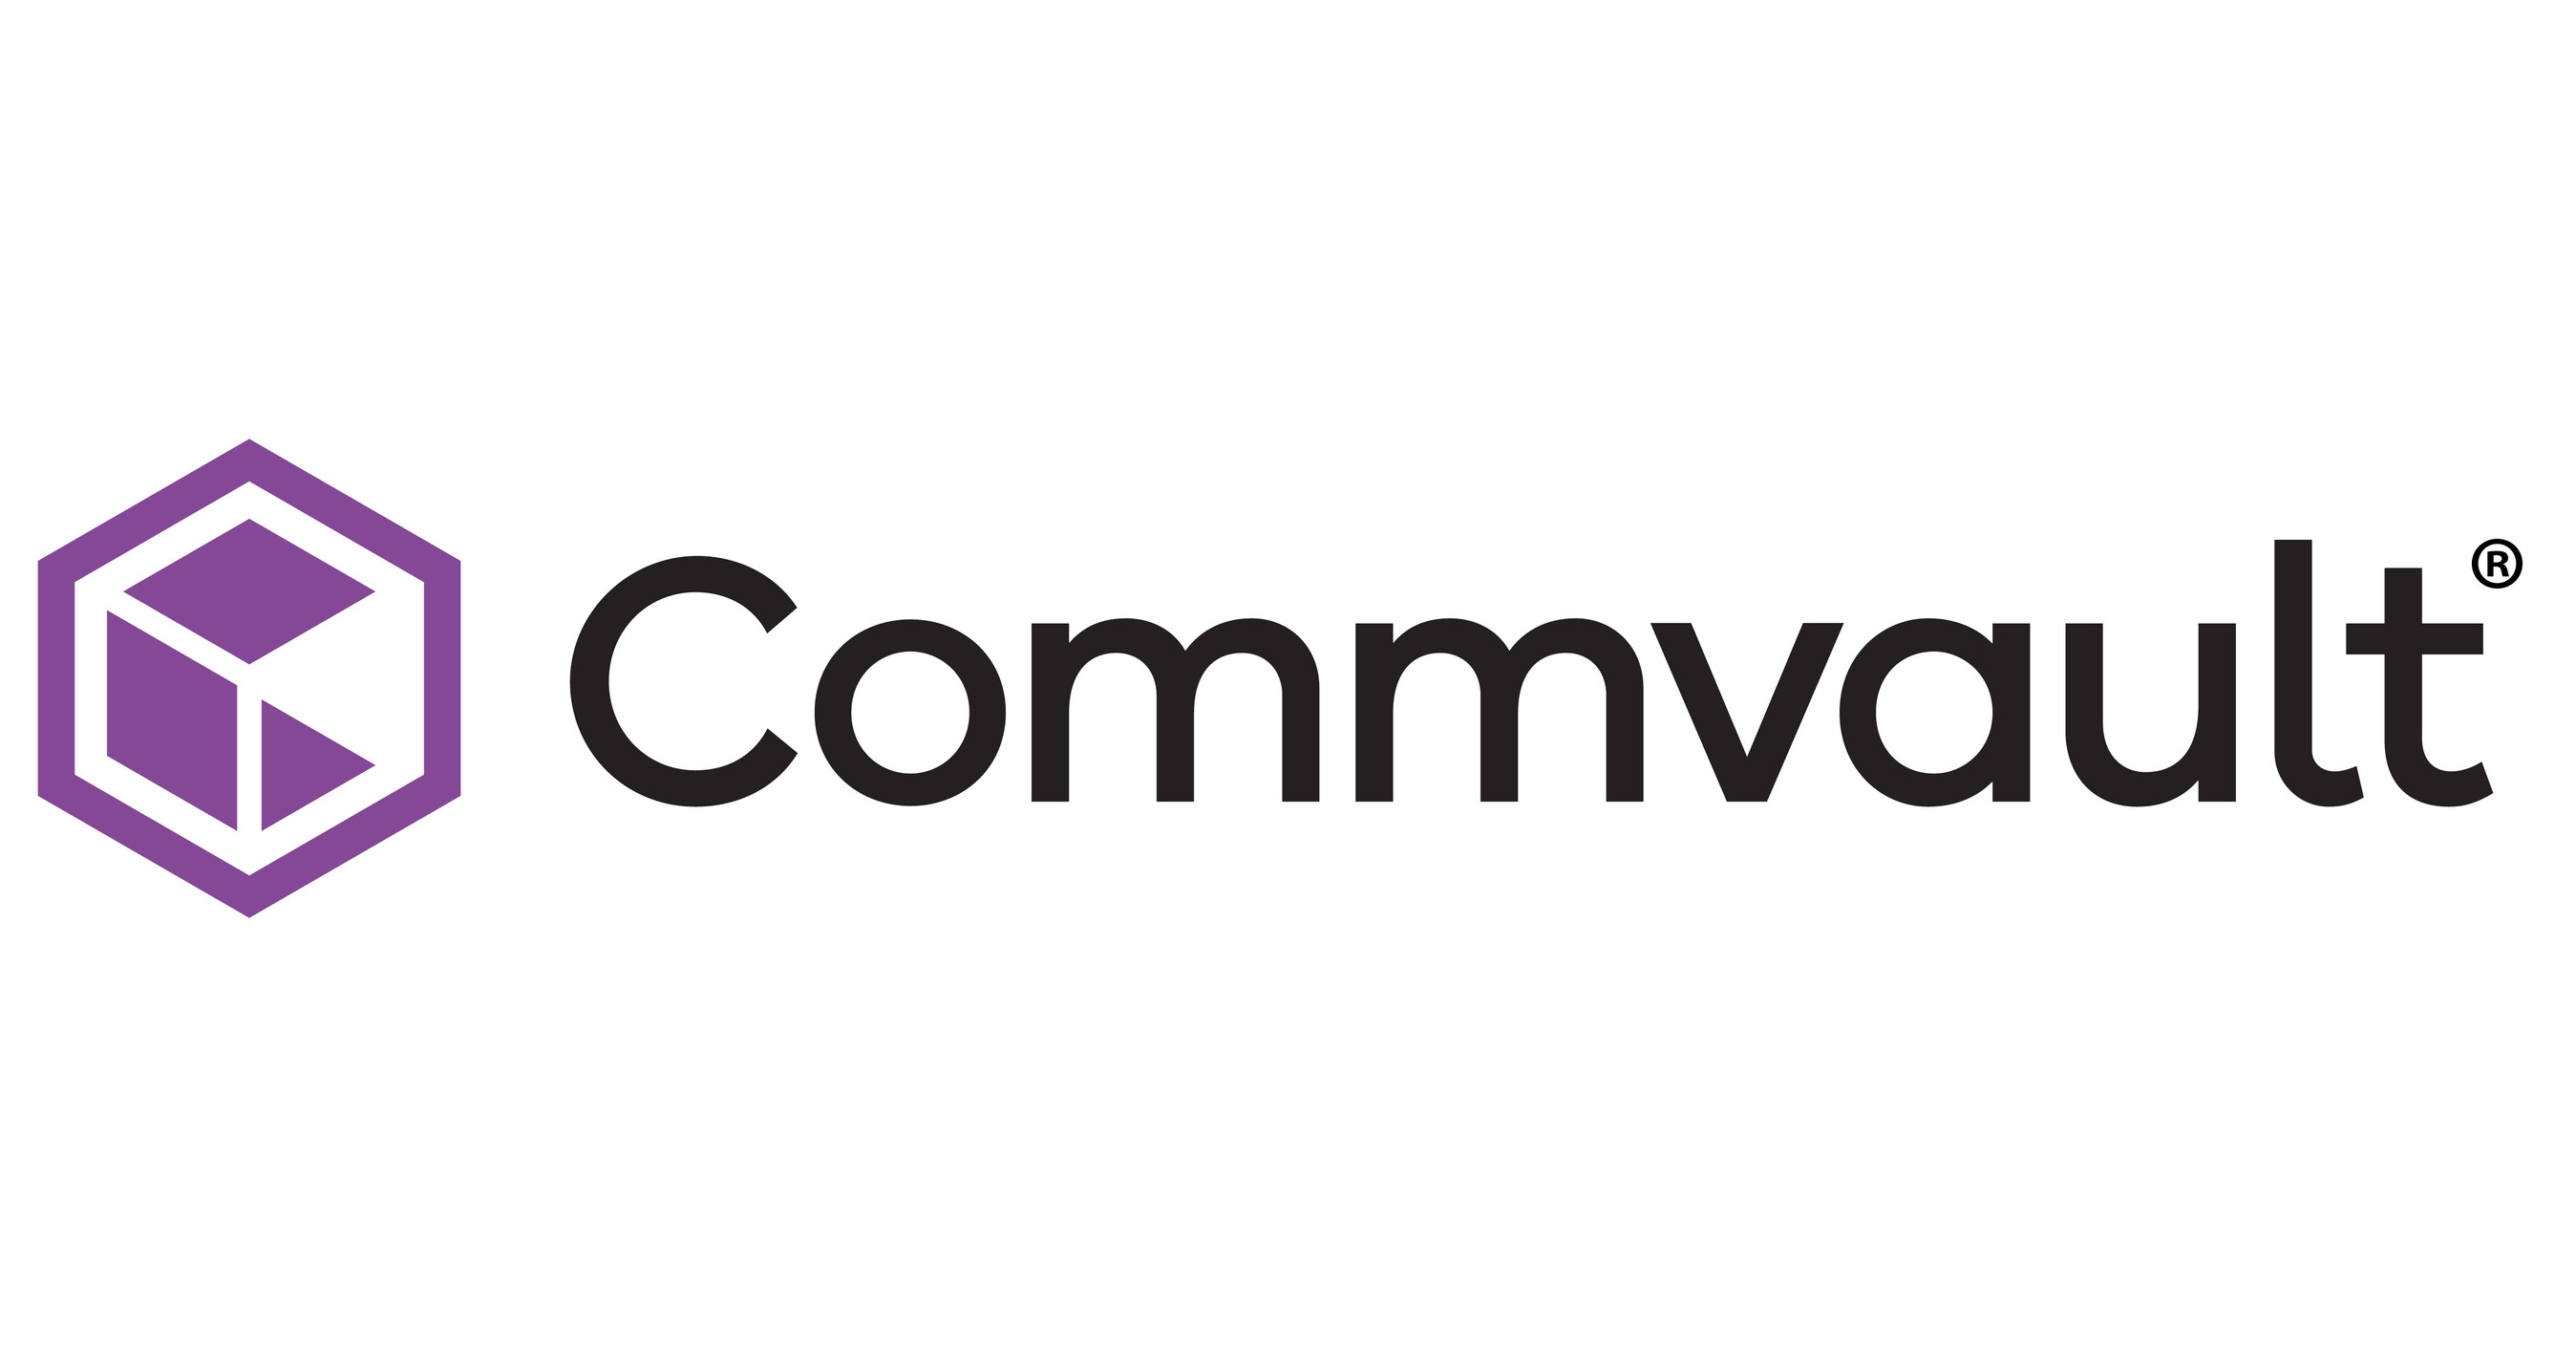 Commvault to Host Connections 2022, an Industry Experience for Data-minded CIOs, IT, and Security Pros